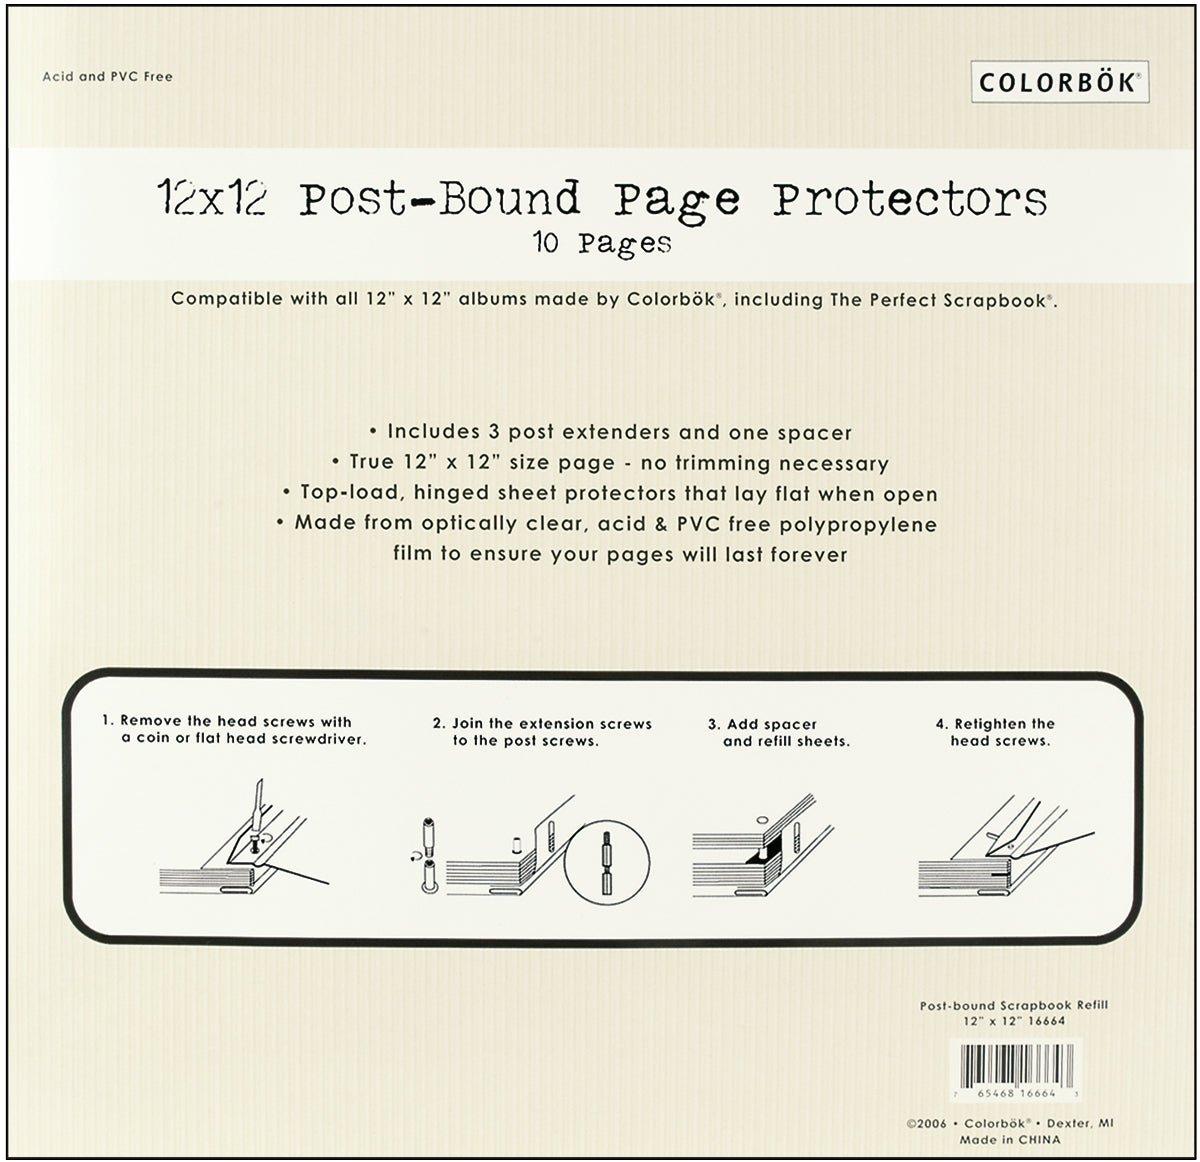 Colorbok Top-Loading Page Protectors 12"X12" 10/Pkg-W/3 Post Extenders & Spacer